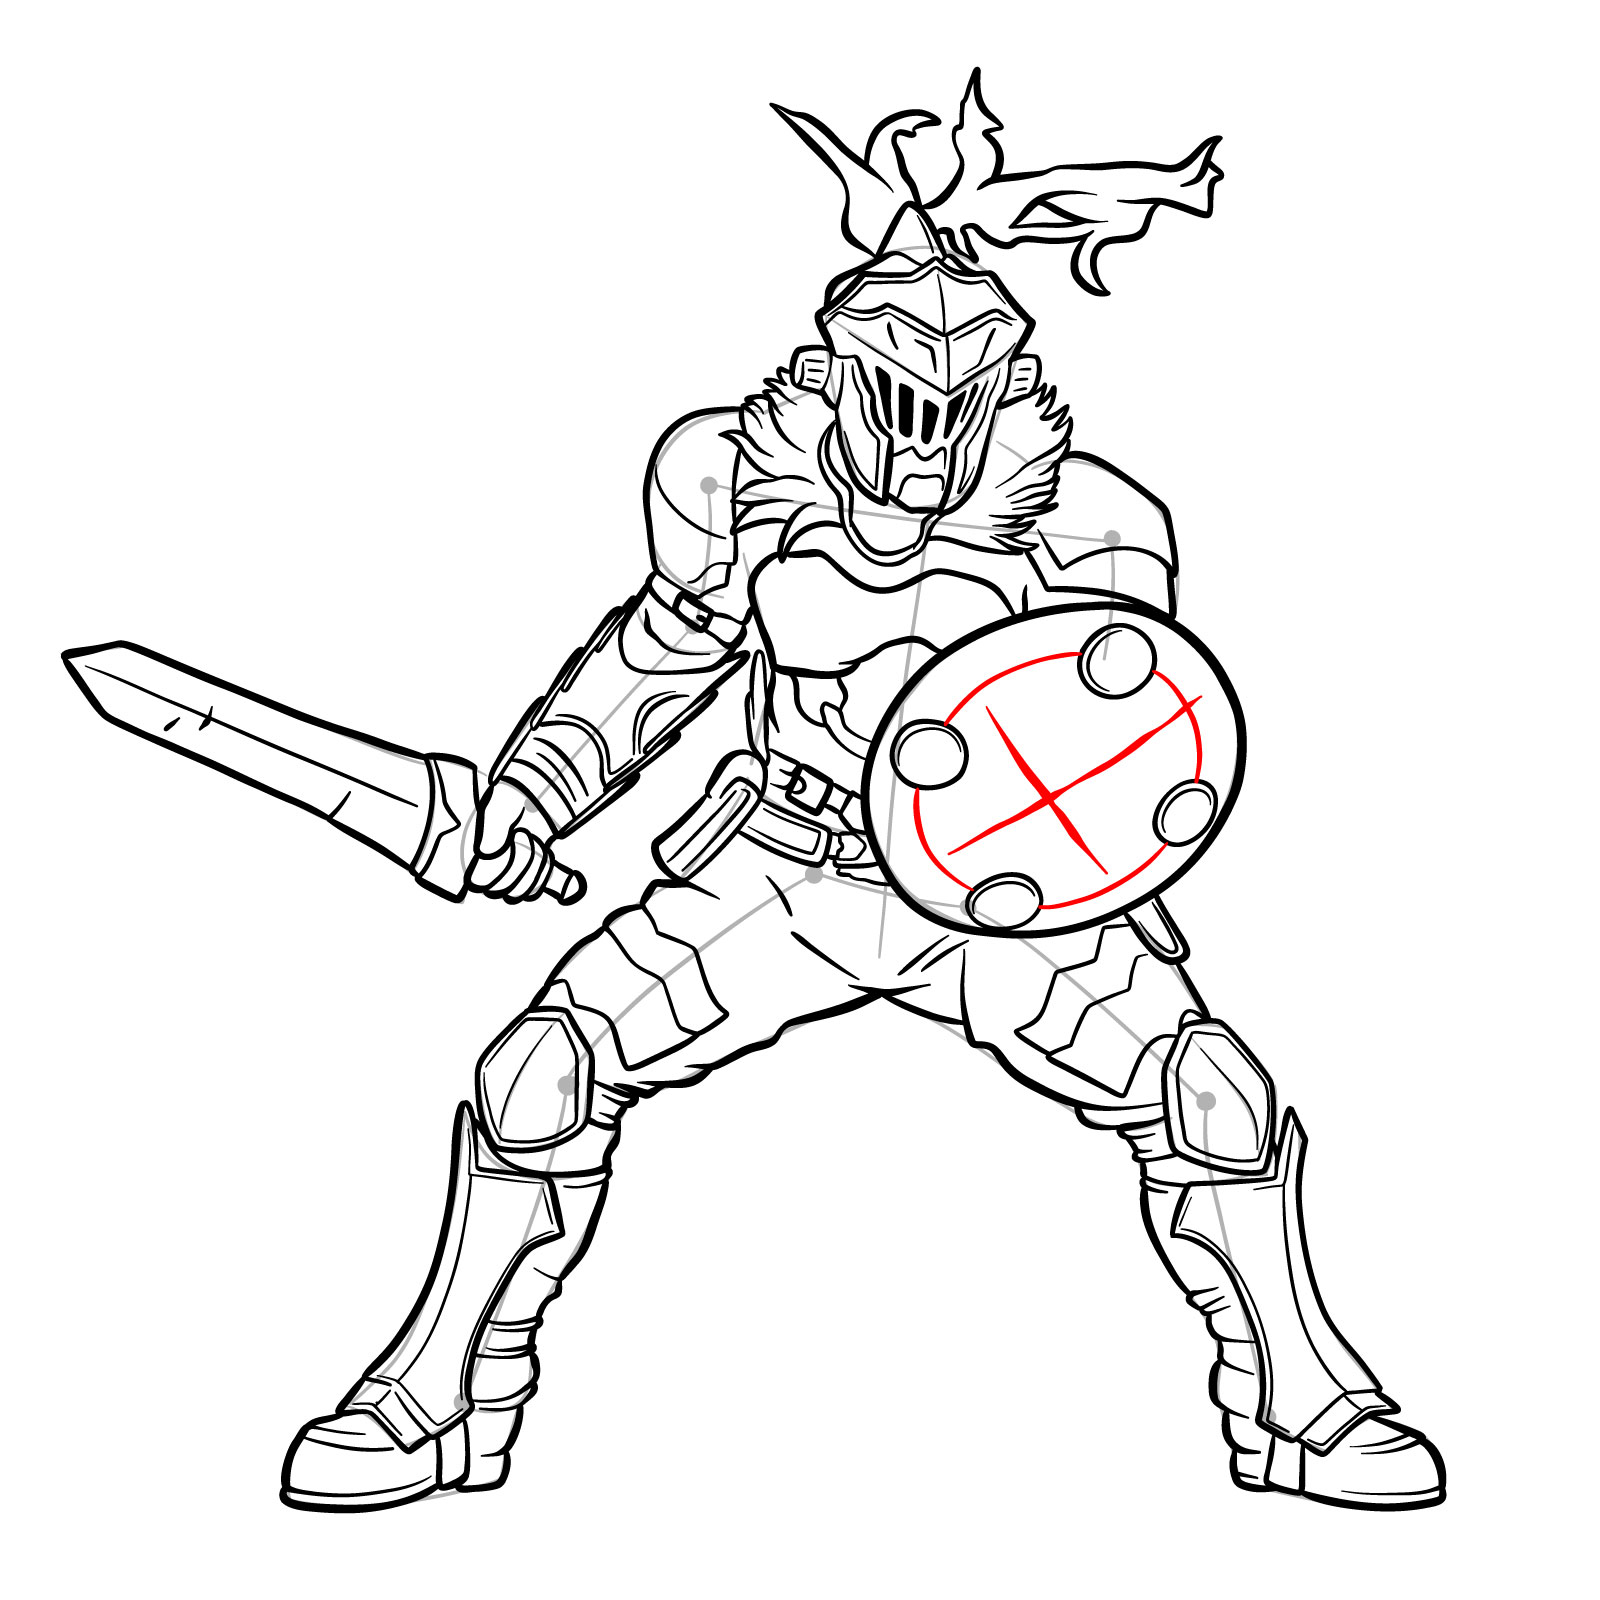 How to Draw Goblin Slayer in battle stance - step 40